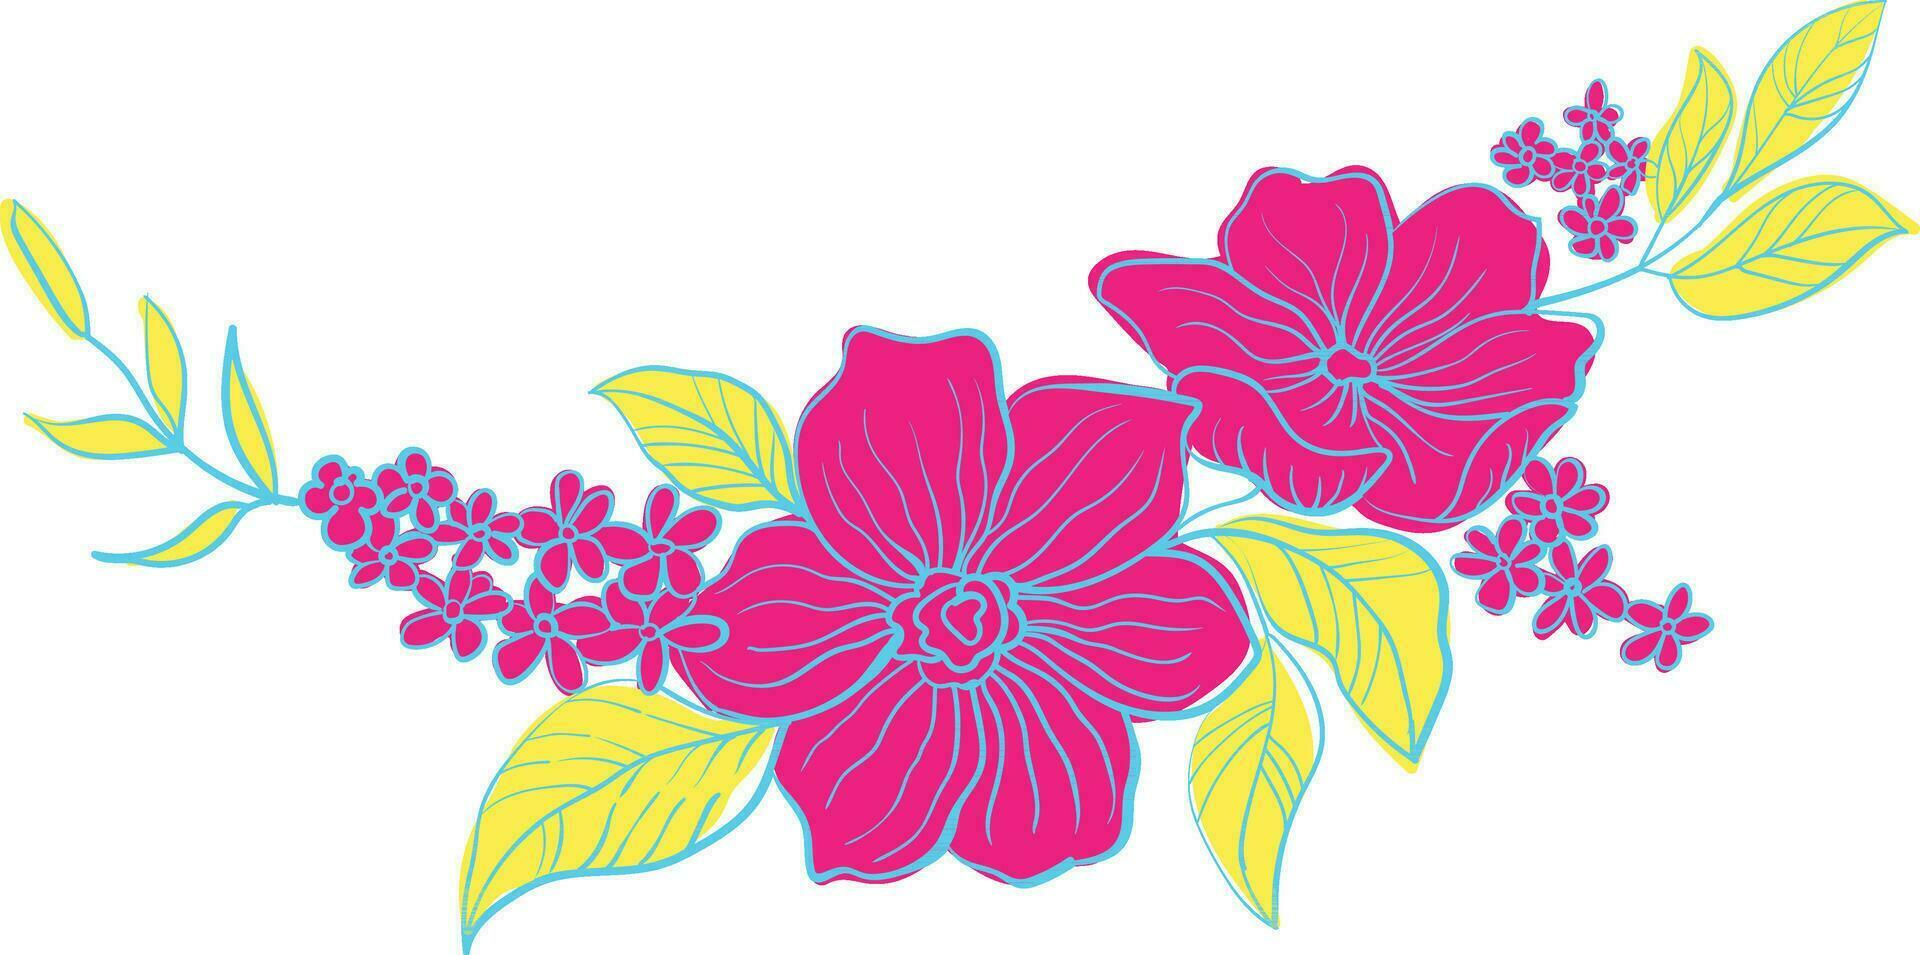 beautiful flowers with branches and leafs decorative icon vector illustration design